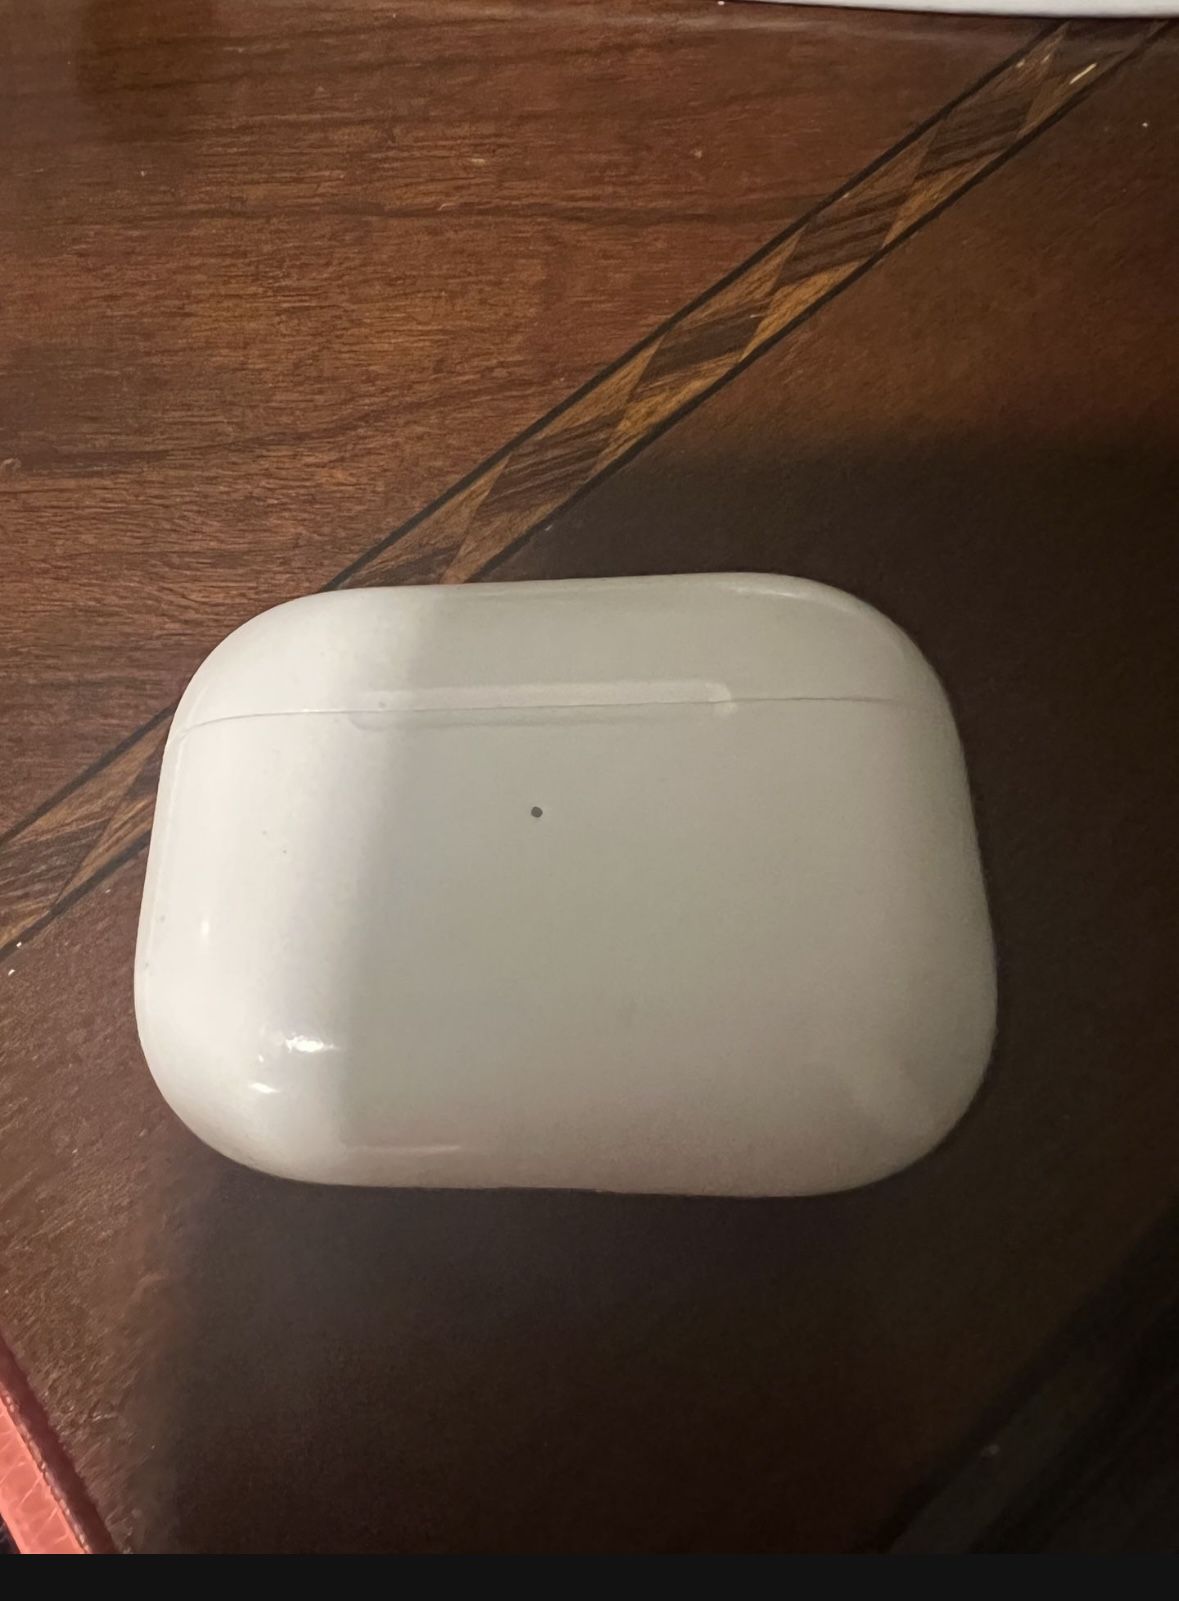 AirPod Pros Perfect Condition 